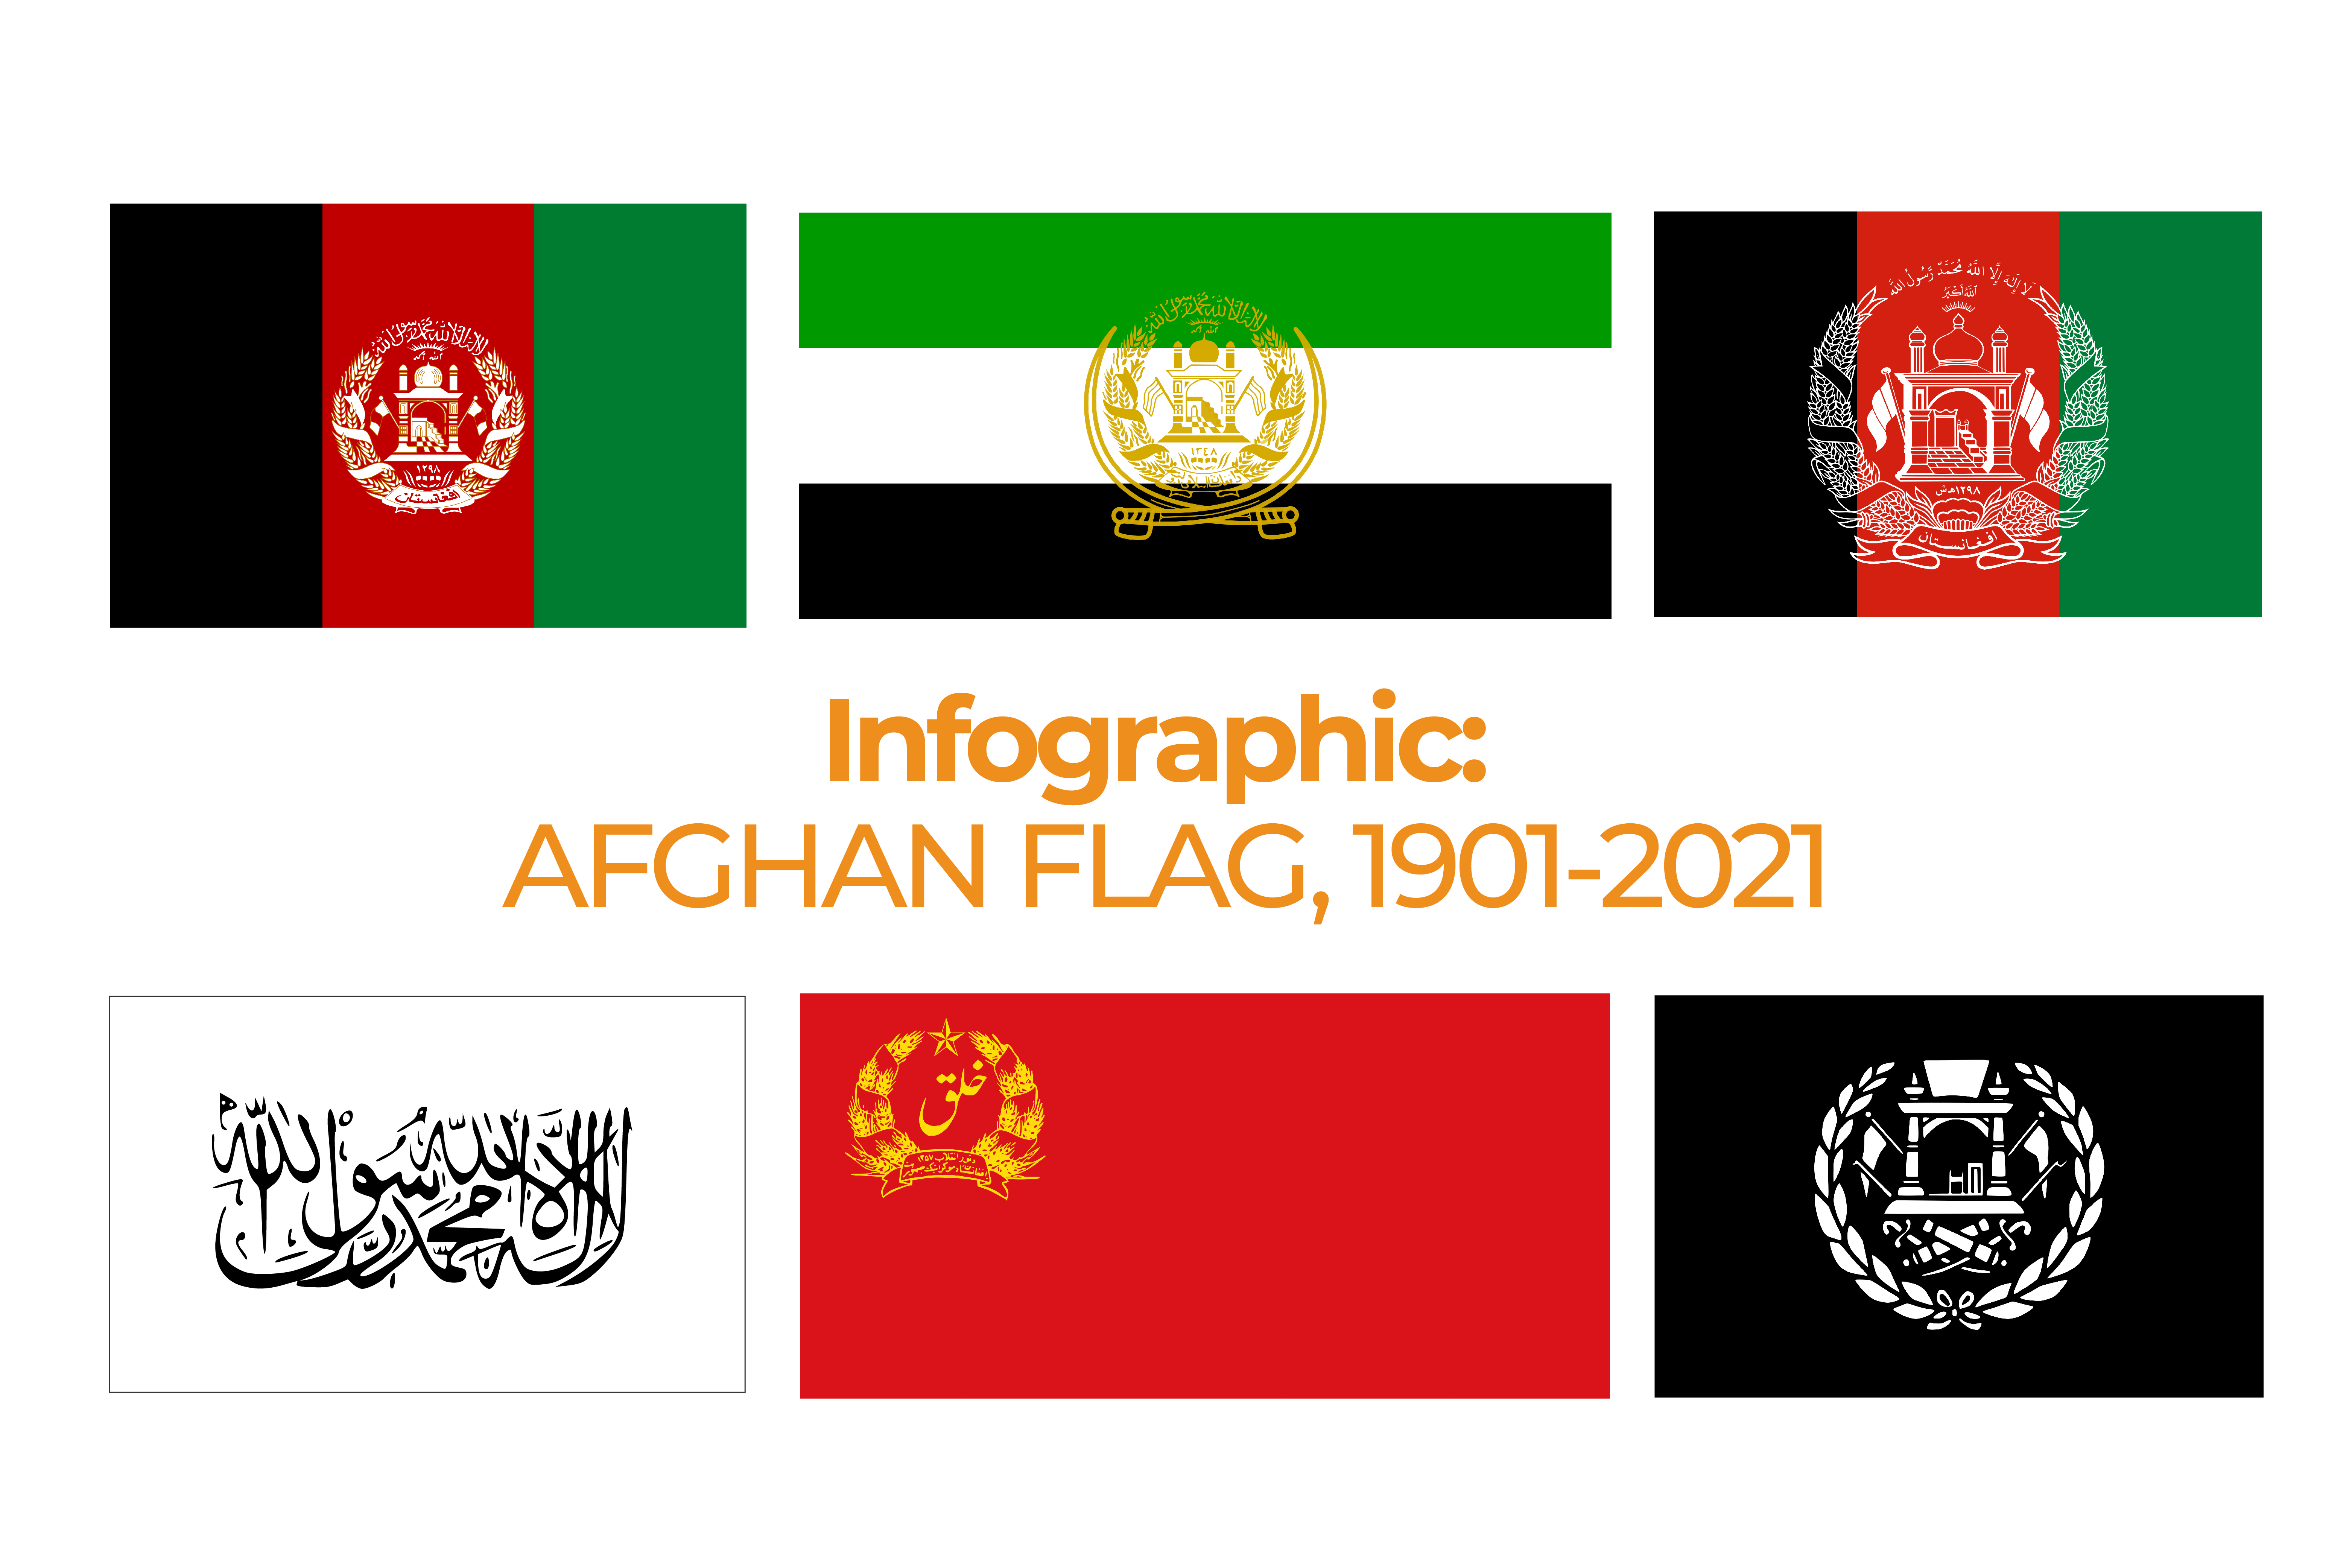 Afghanistan’s Flags Over The Years (1901-2021) | Al Jazeera Infographic